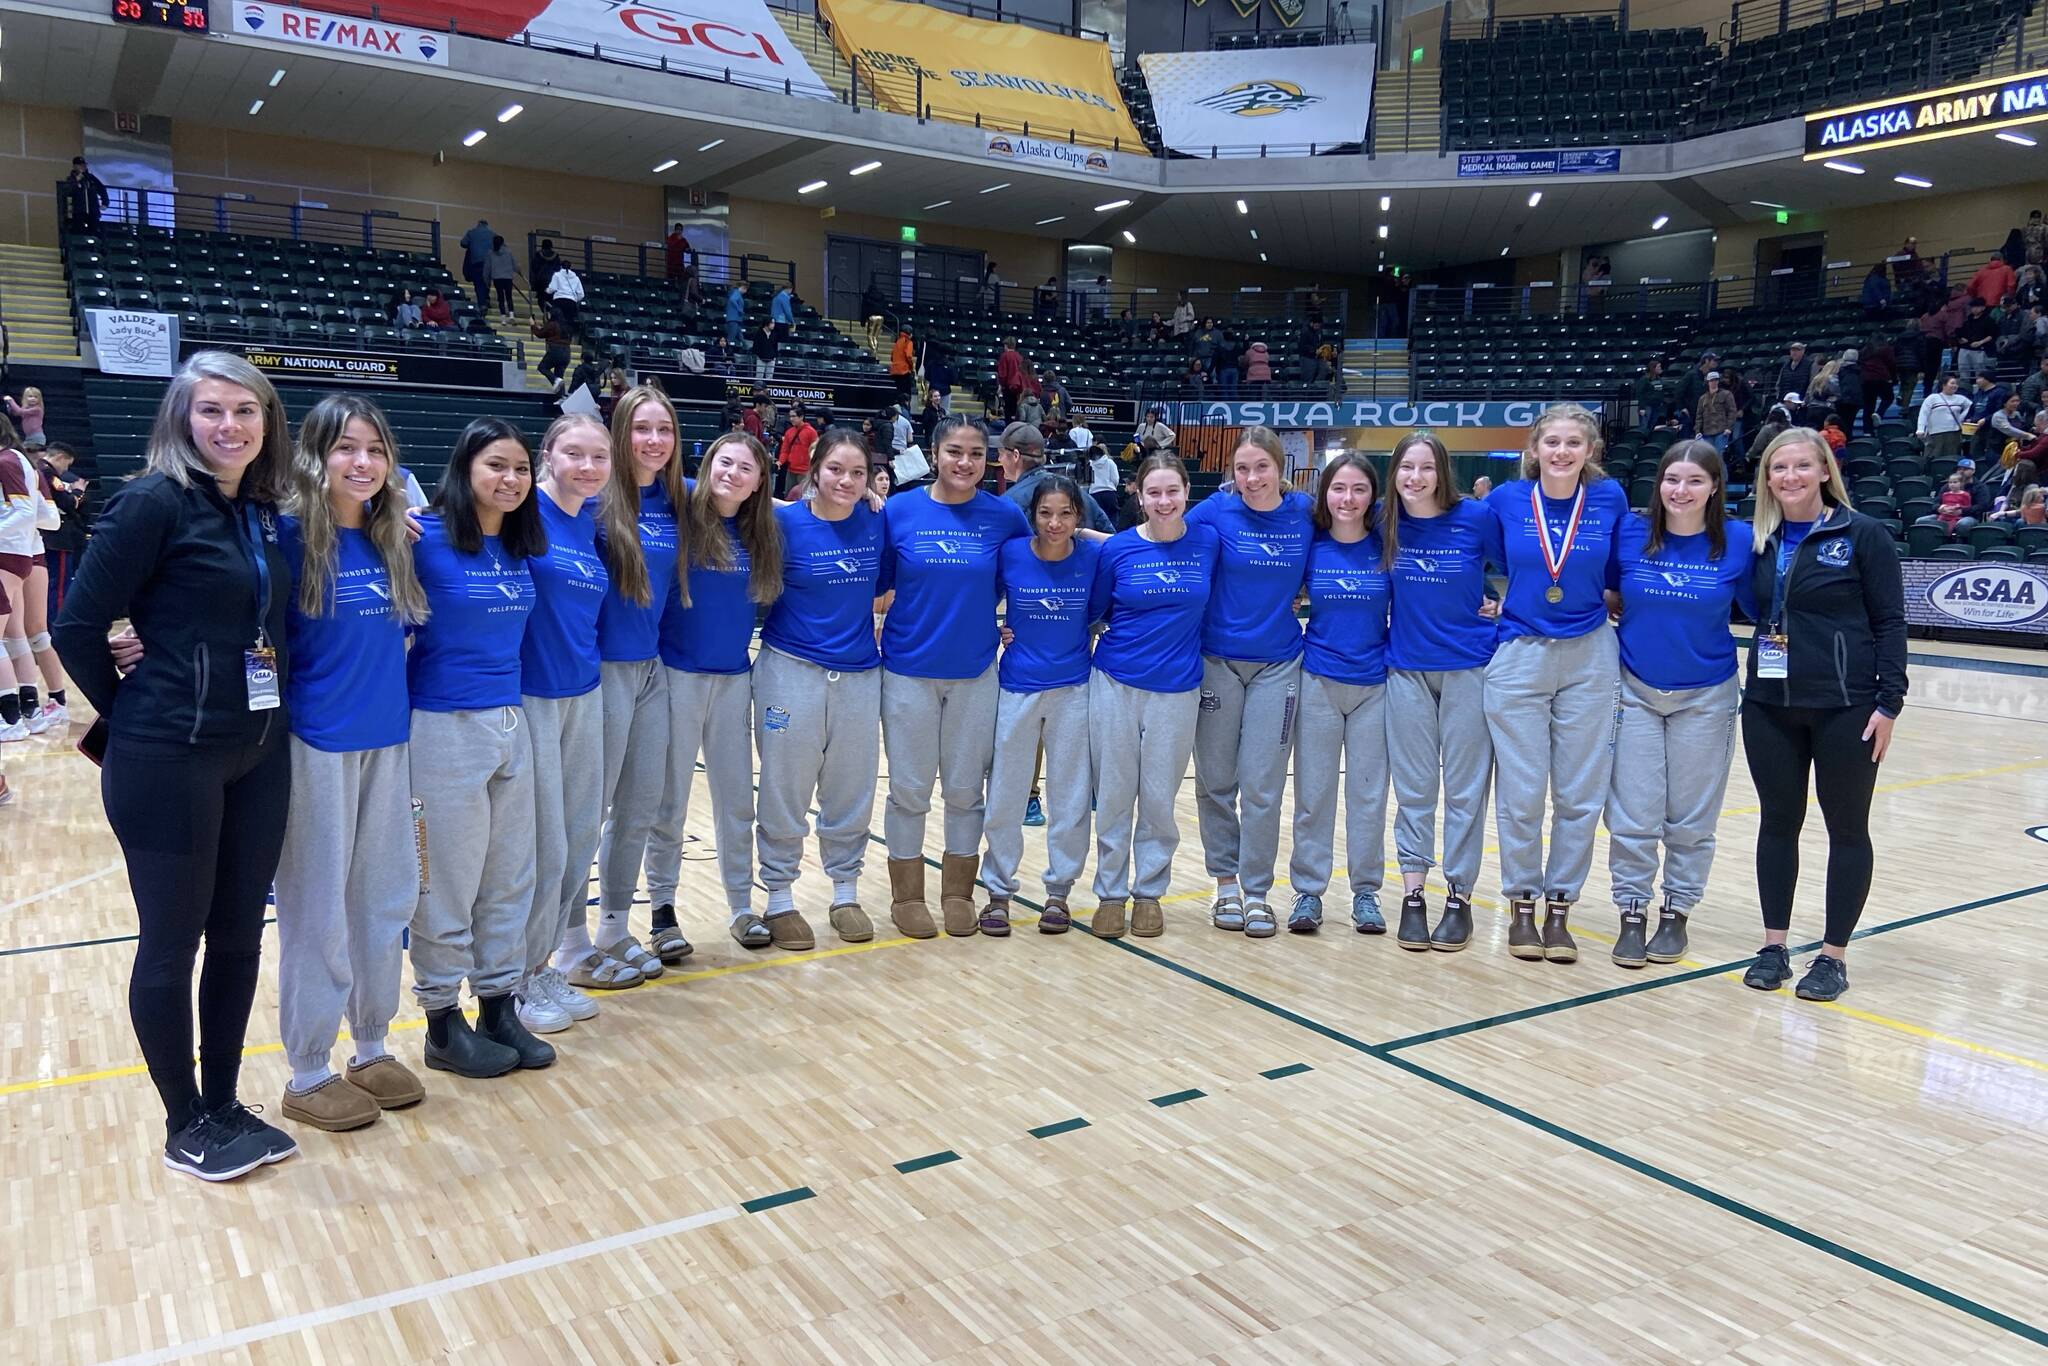 Courtesy Photo / Julie Herman 
The 2022-23 Thunder Mountain girls varsity volleyball team poses for a group photo during 2022 3A/4A Volleyball State Championships in Anchorage on Thursday and Friday, Nov. 10 and 11.